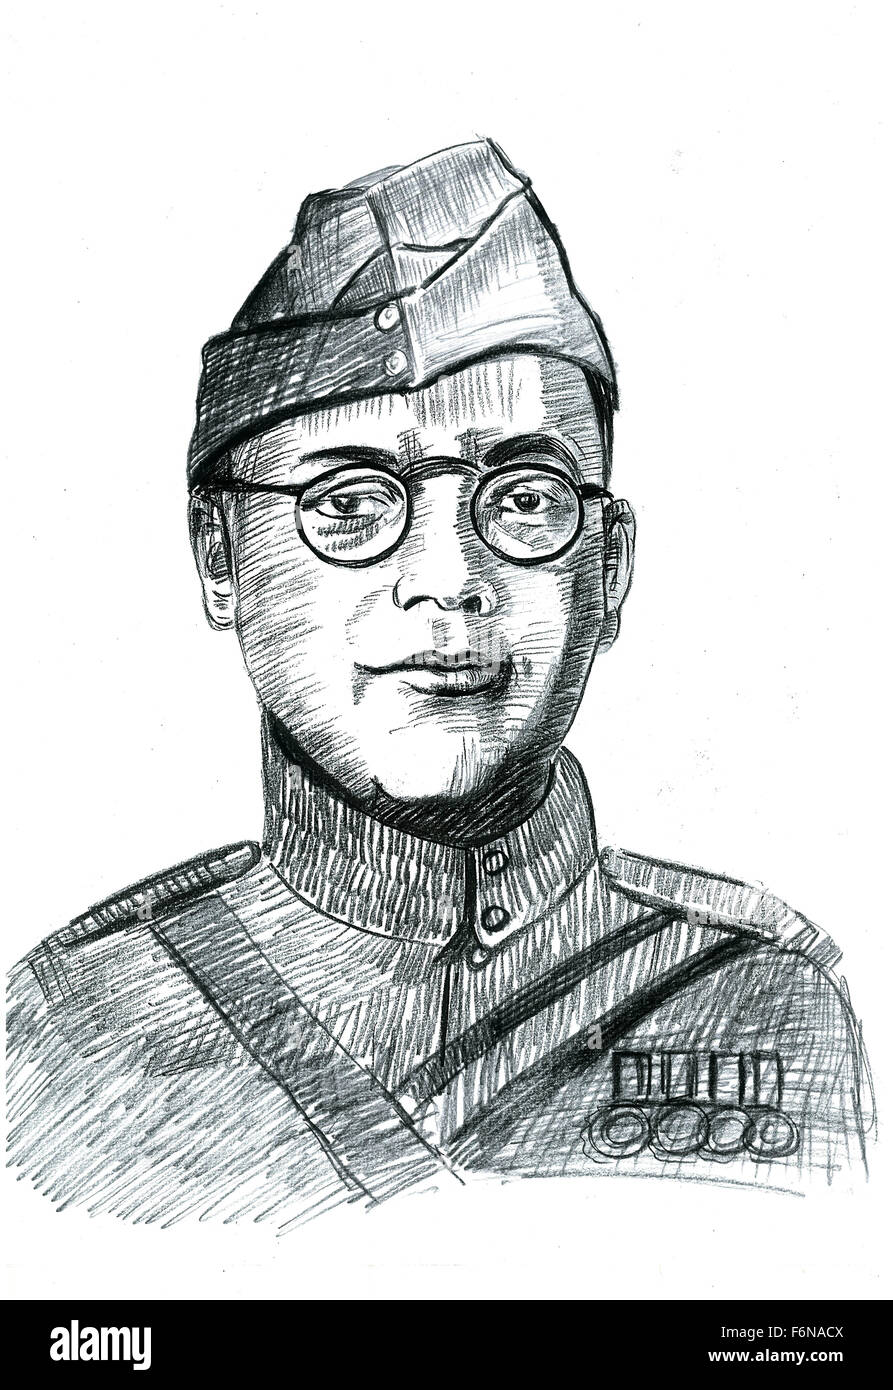 Top more than 151 freedom fighters pencil sketches latest